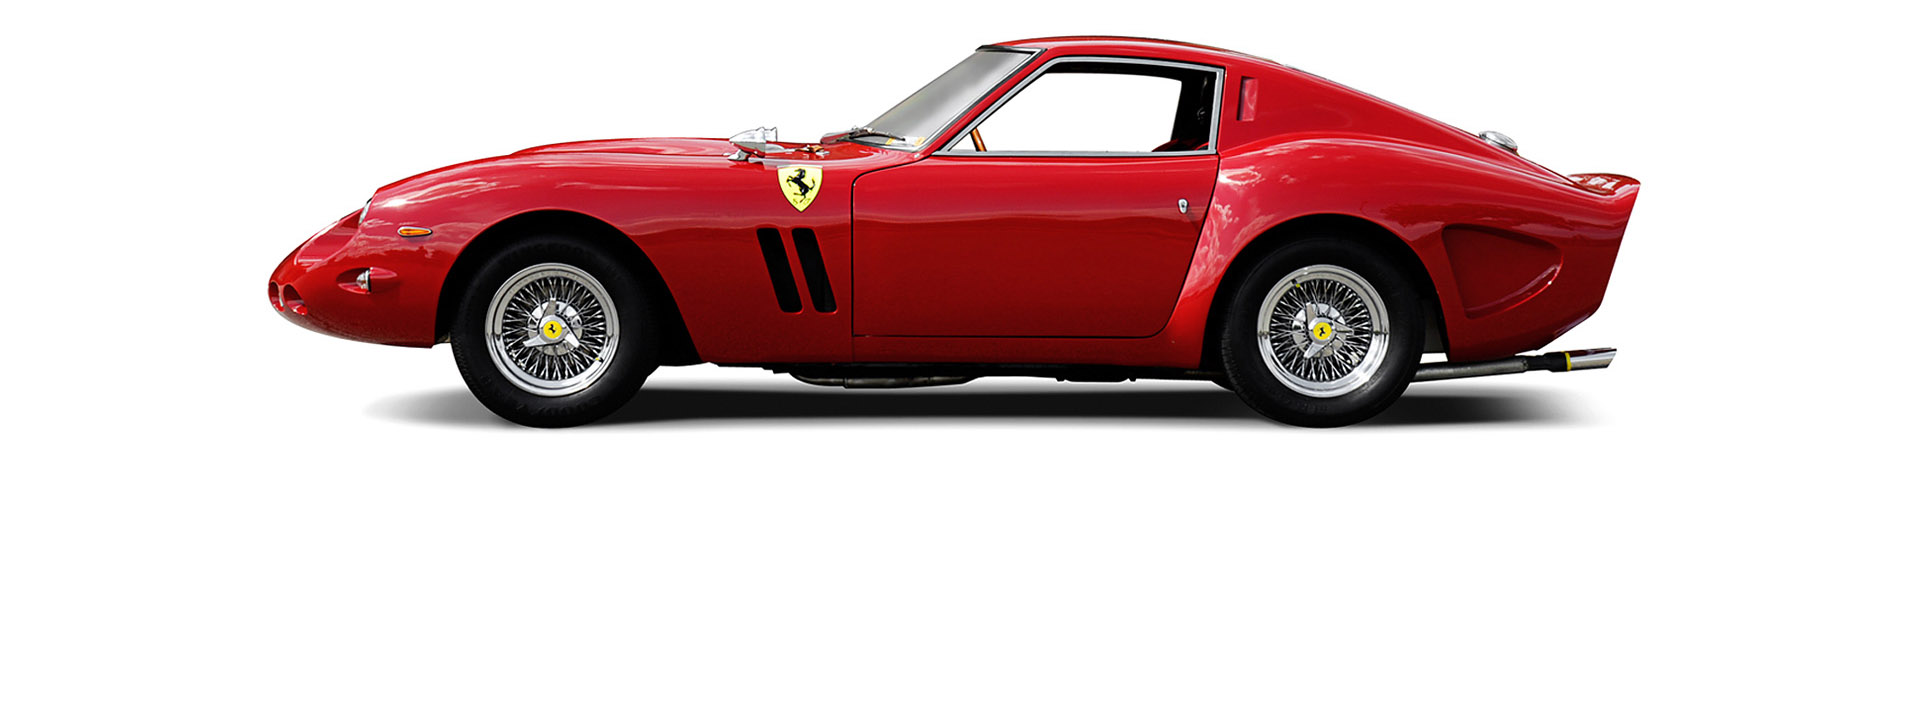 Real or Steal? Vintage Ferrari GTO Sale Might be a Hoax